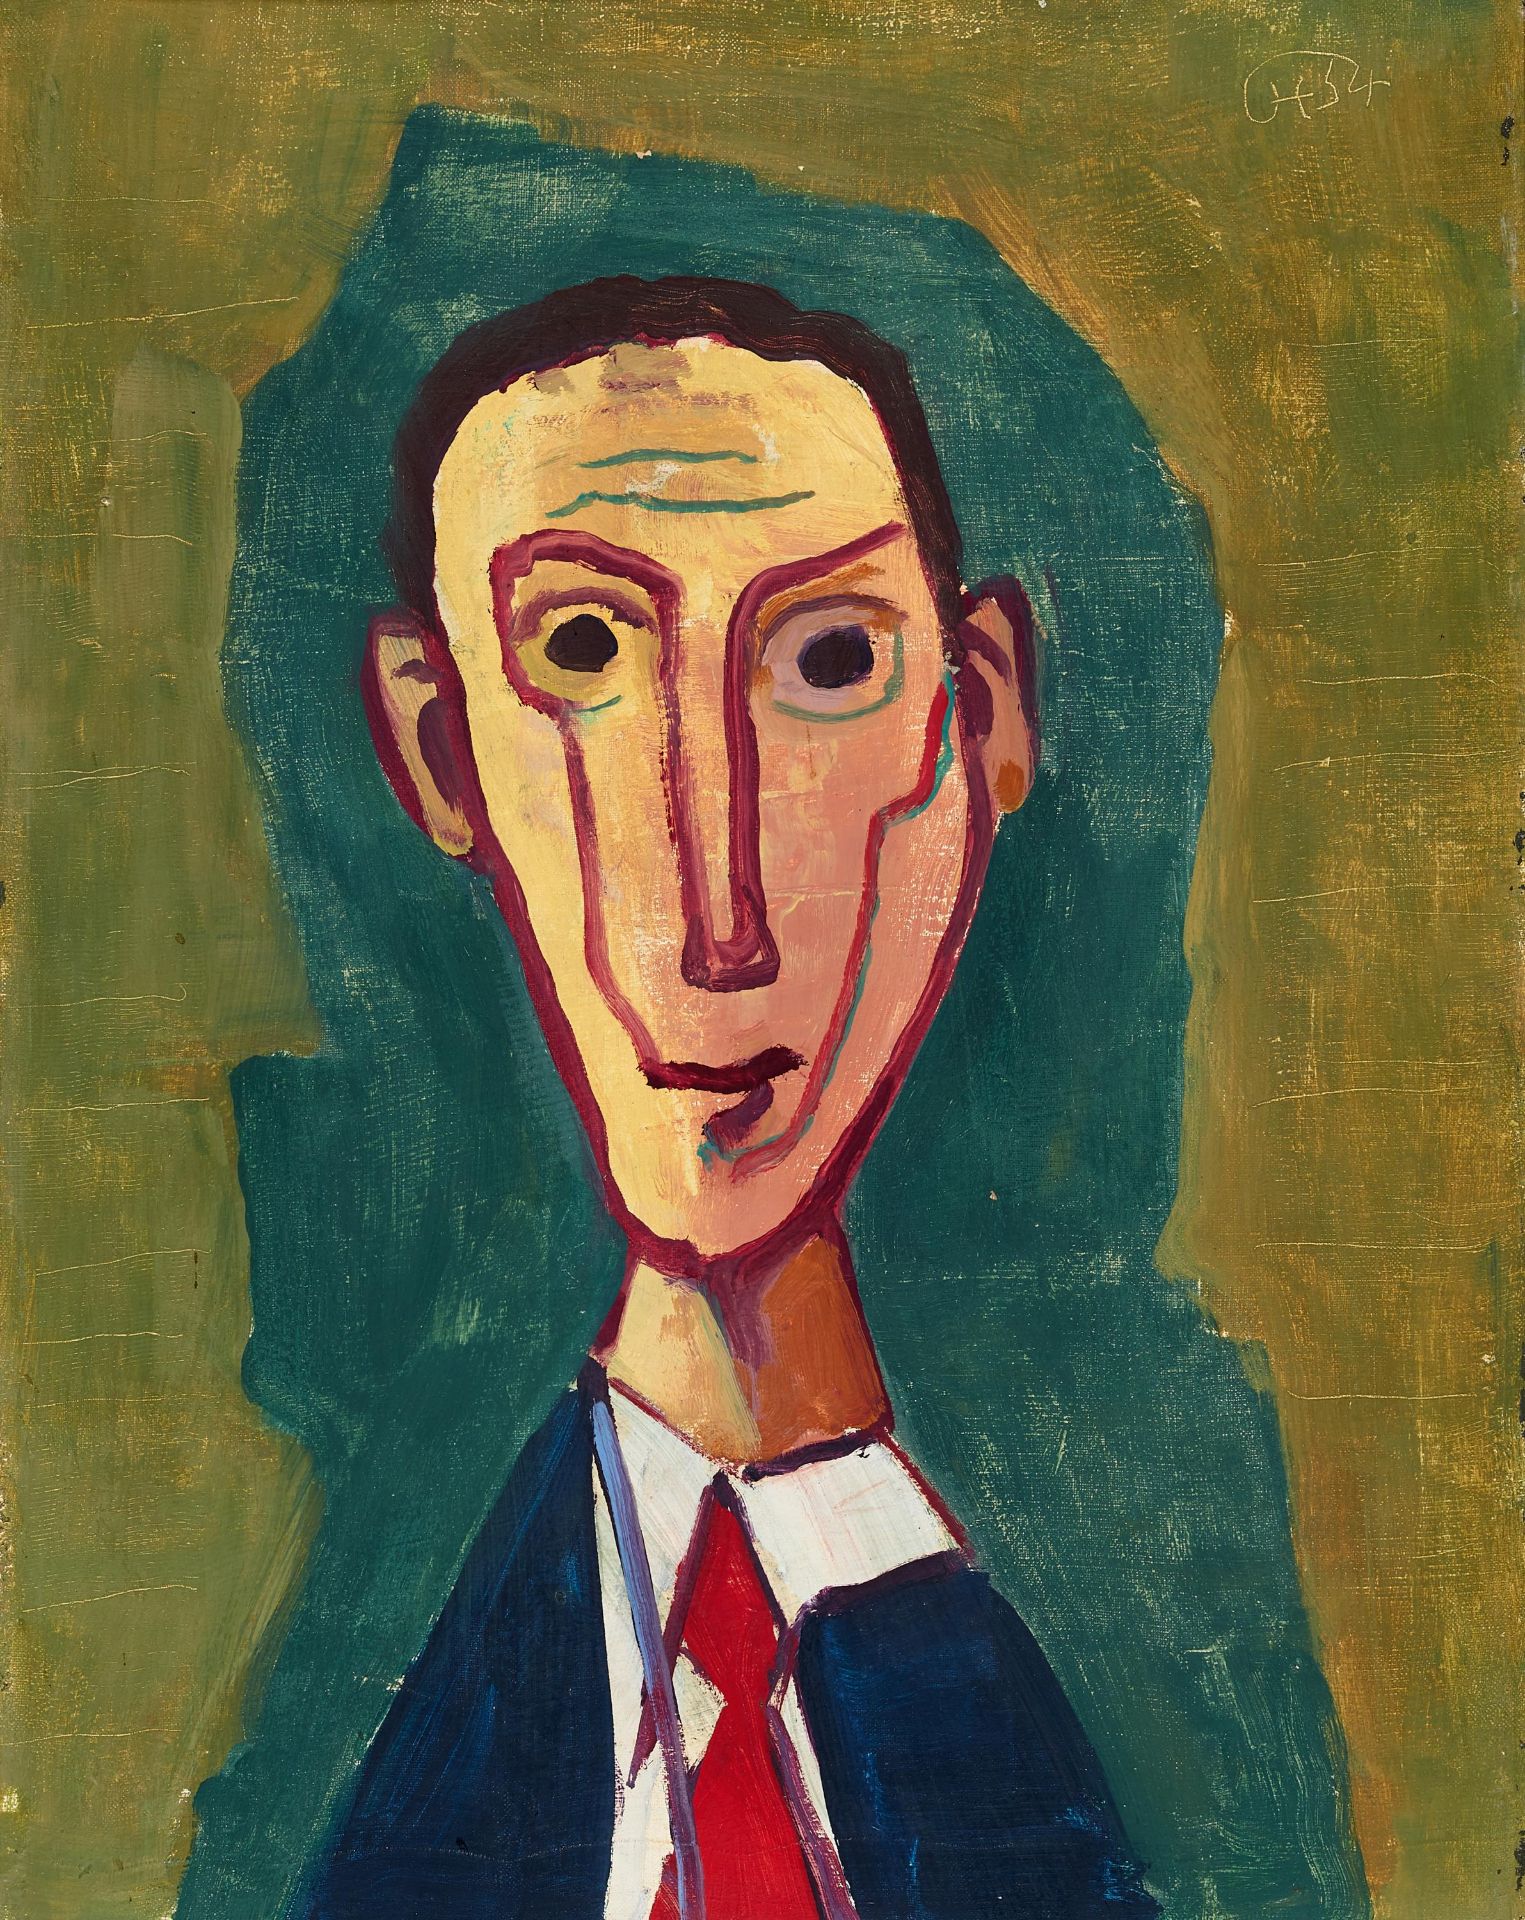 HOFER, KARL1878 Karlsruhe - 1955 BerlinExpressionistic Portrait of a Man with a Red Tie. 1954. Oil